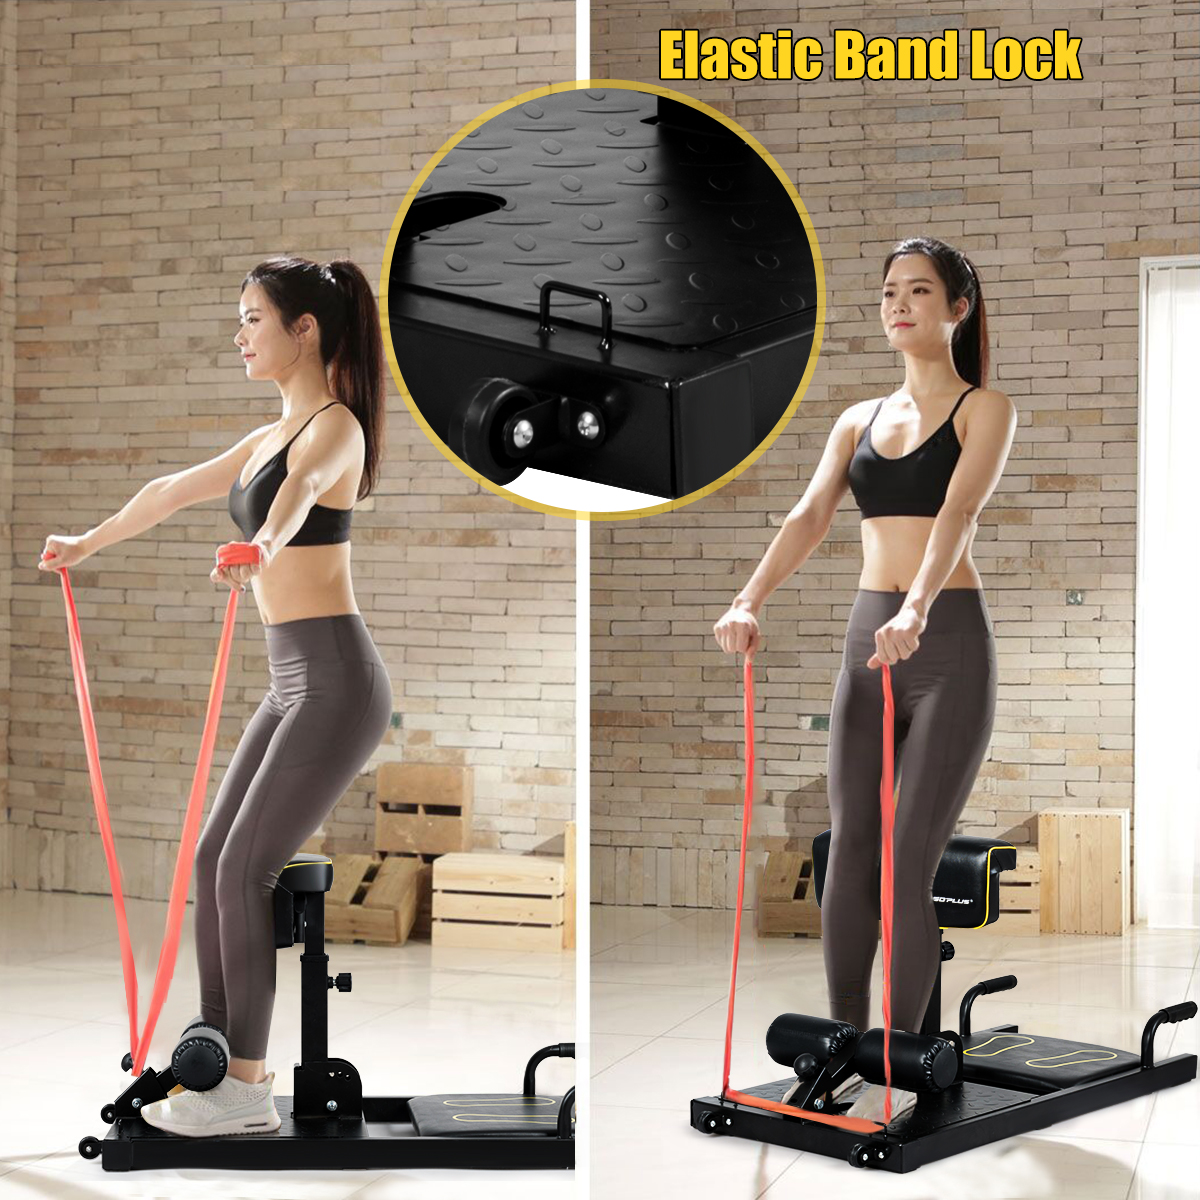 Gpolus 8-in-1 Multifunction Squat Machine Deep Sissy Squat Home Gym Fitness Ab Trainer - image 8 of 10